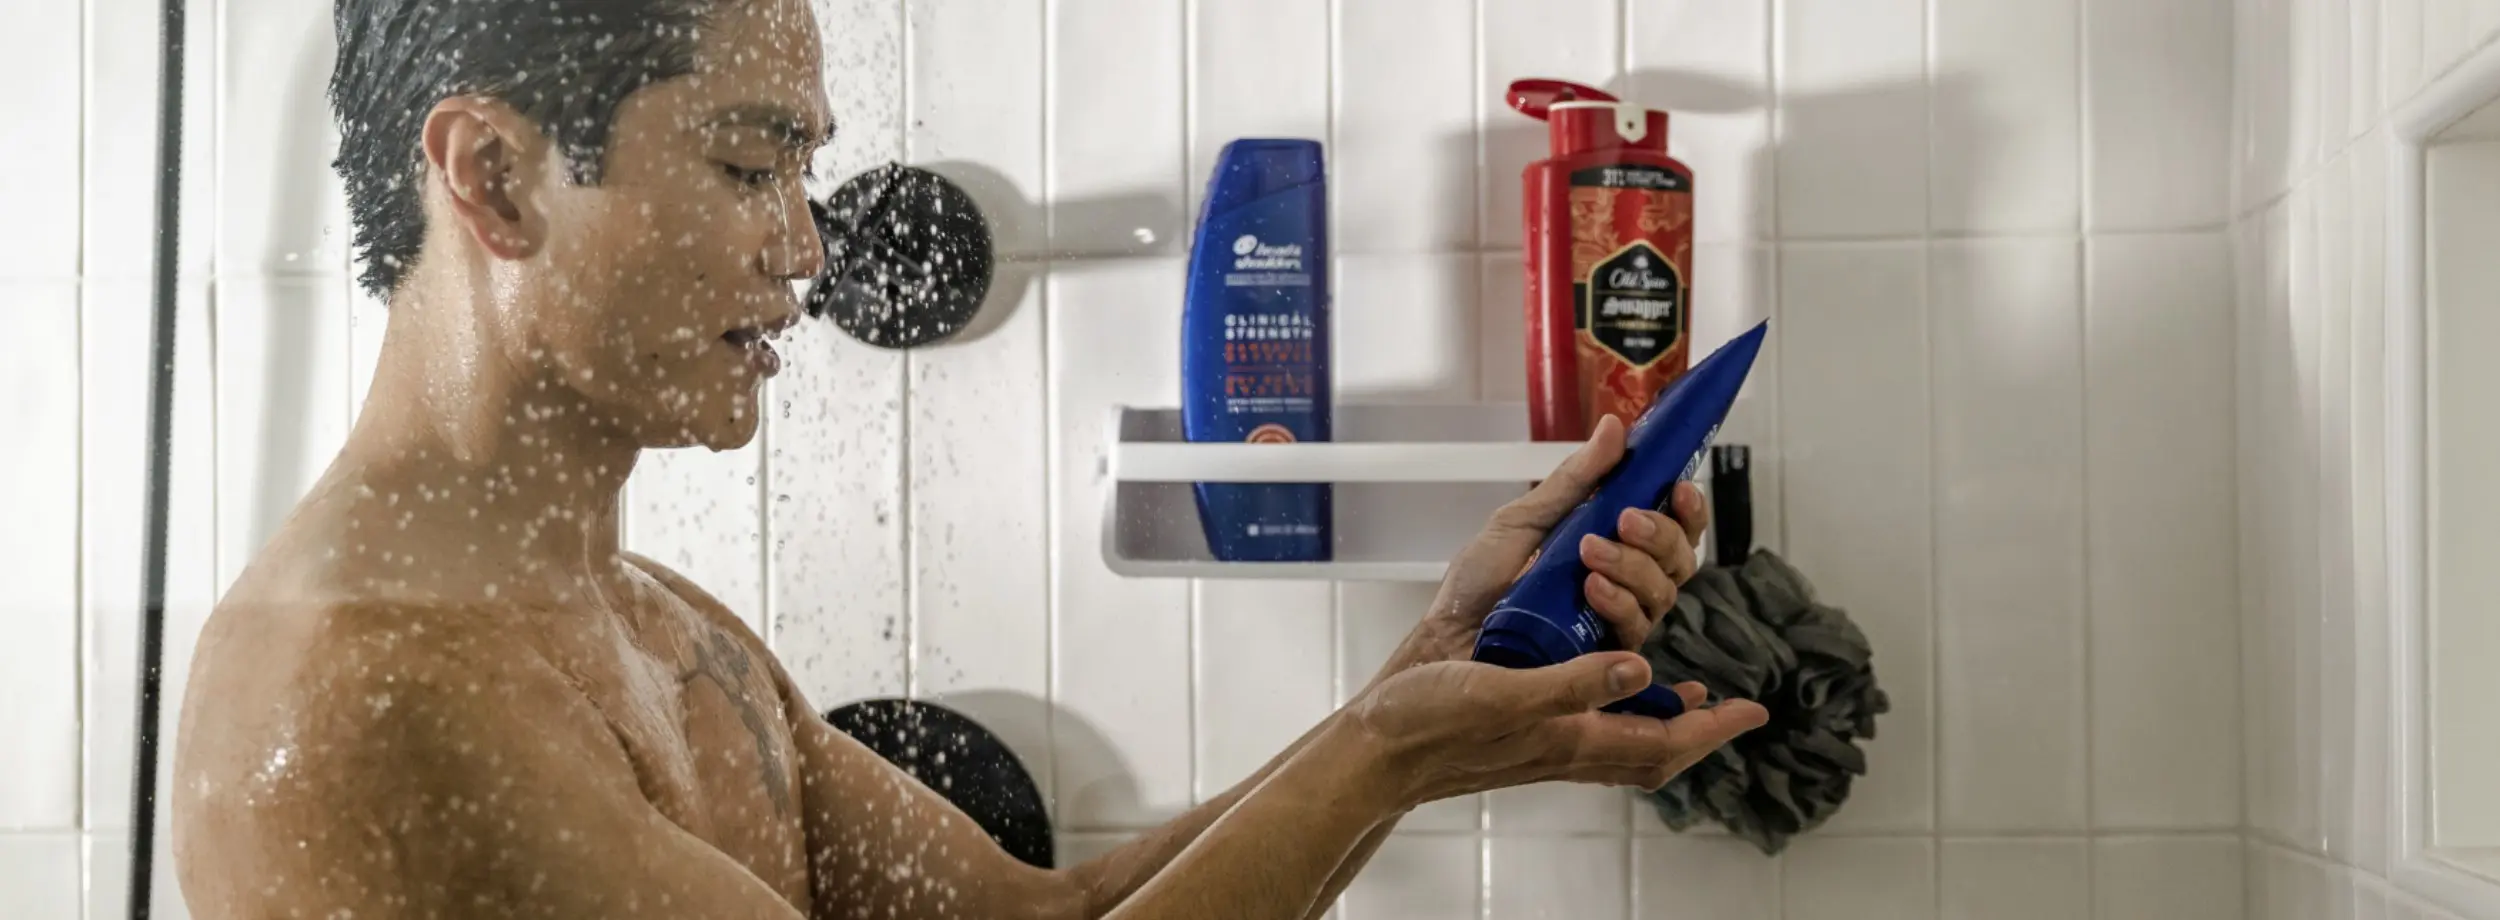 Man in shower squeezes Head & Shoulders shampoo into his hand.